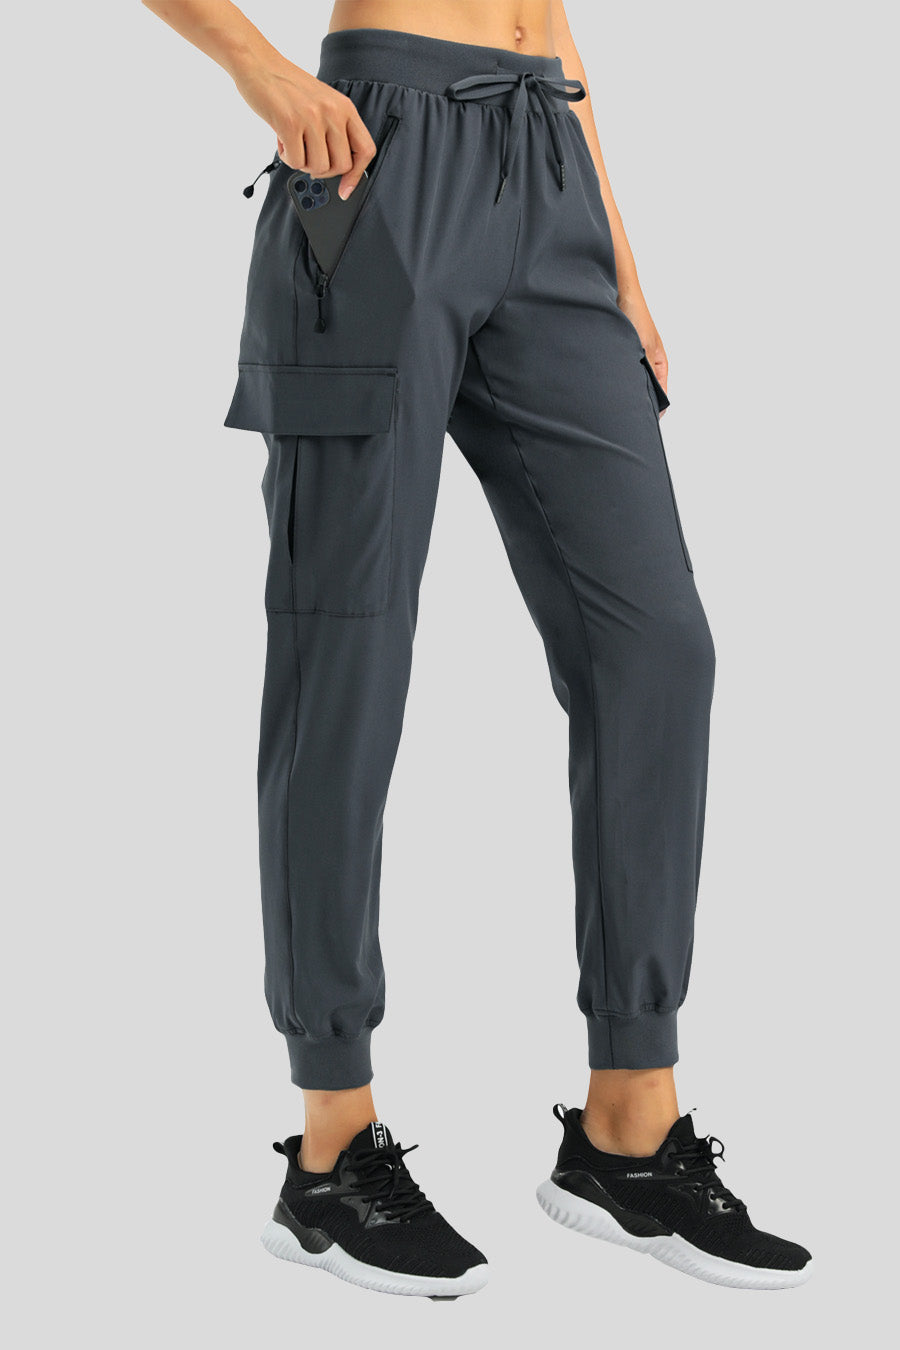 womens hiking cargo pants tapered grey side